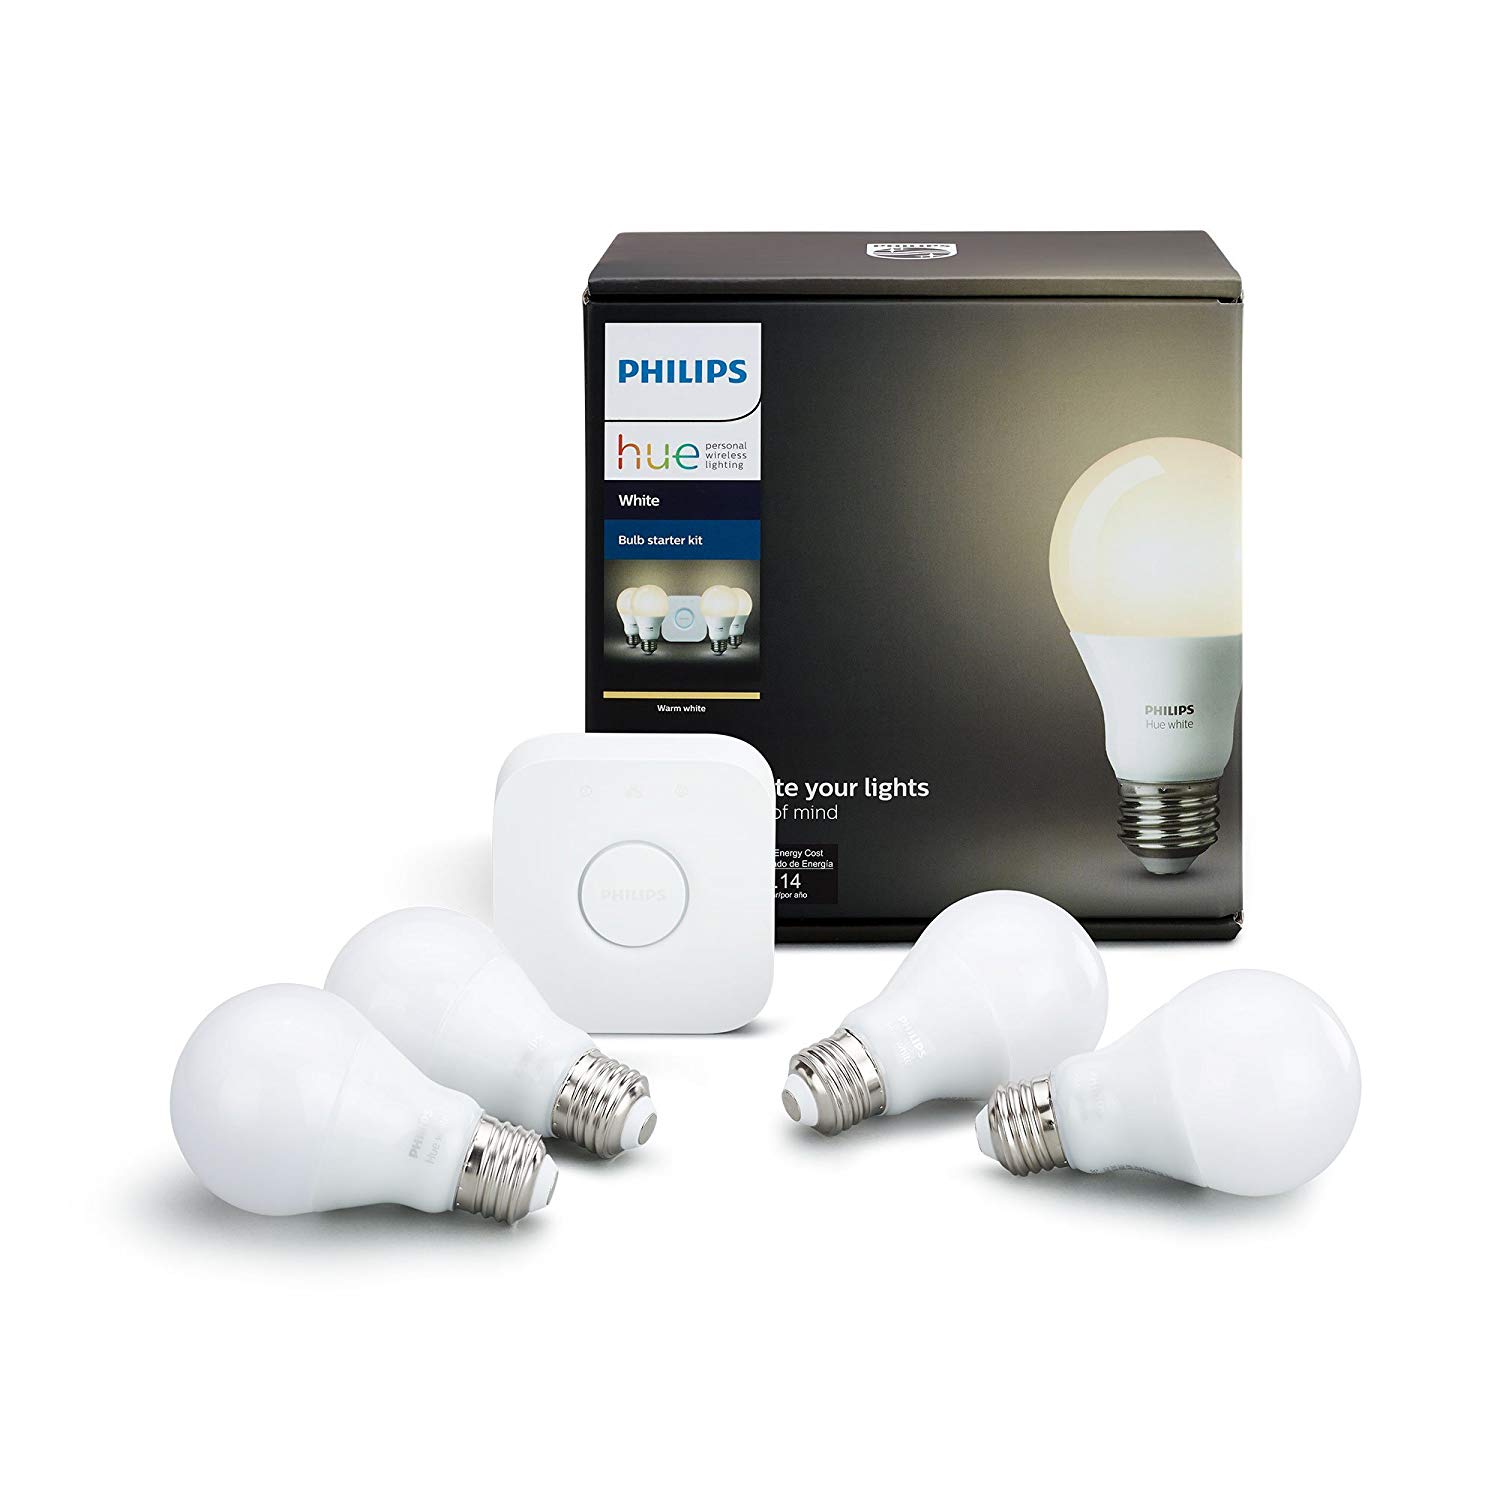 Philips Hue smart lighting starter kit is great for disabled people.